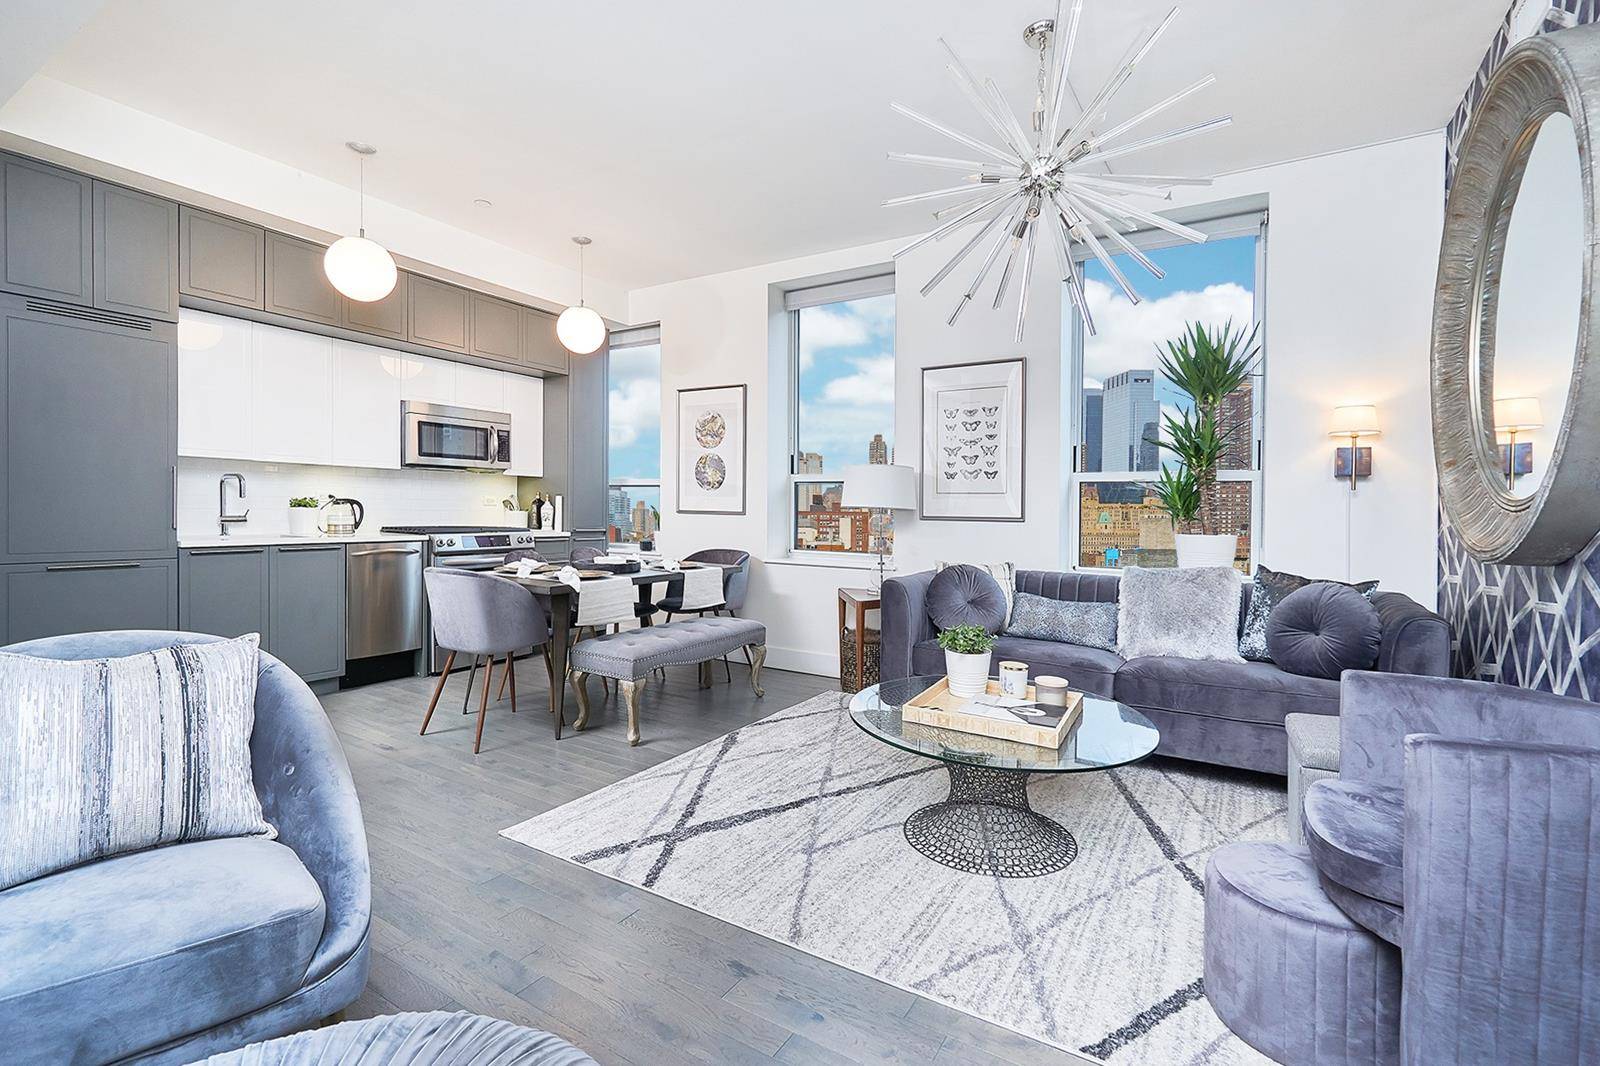 Spacious 1 bedroom 1 bath apartment has a loft like feel with high ceilings, gray stained oak floors, open style kitchen with custom cabinetry and expansive living spaces.